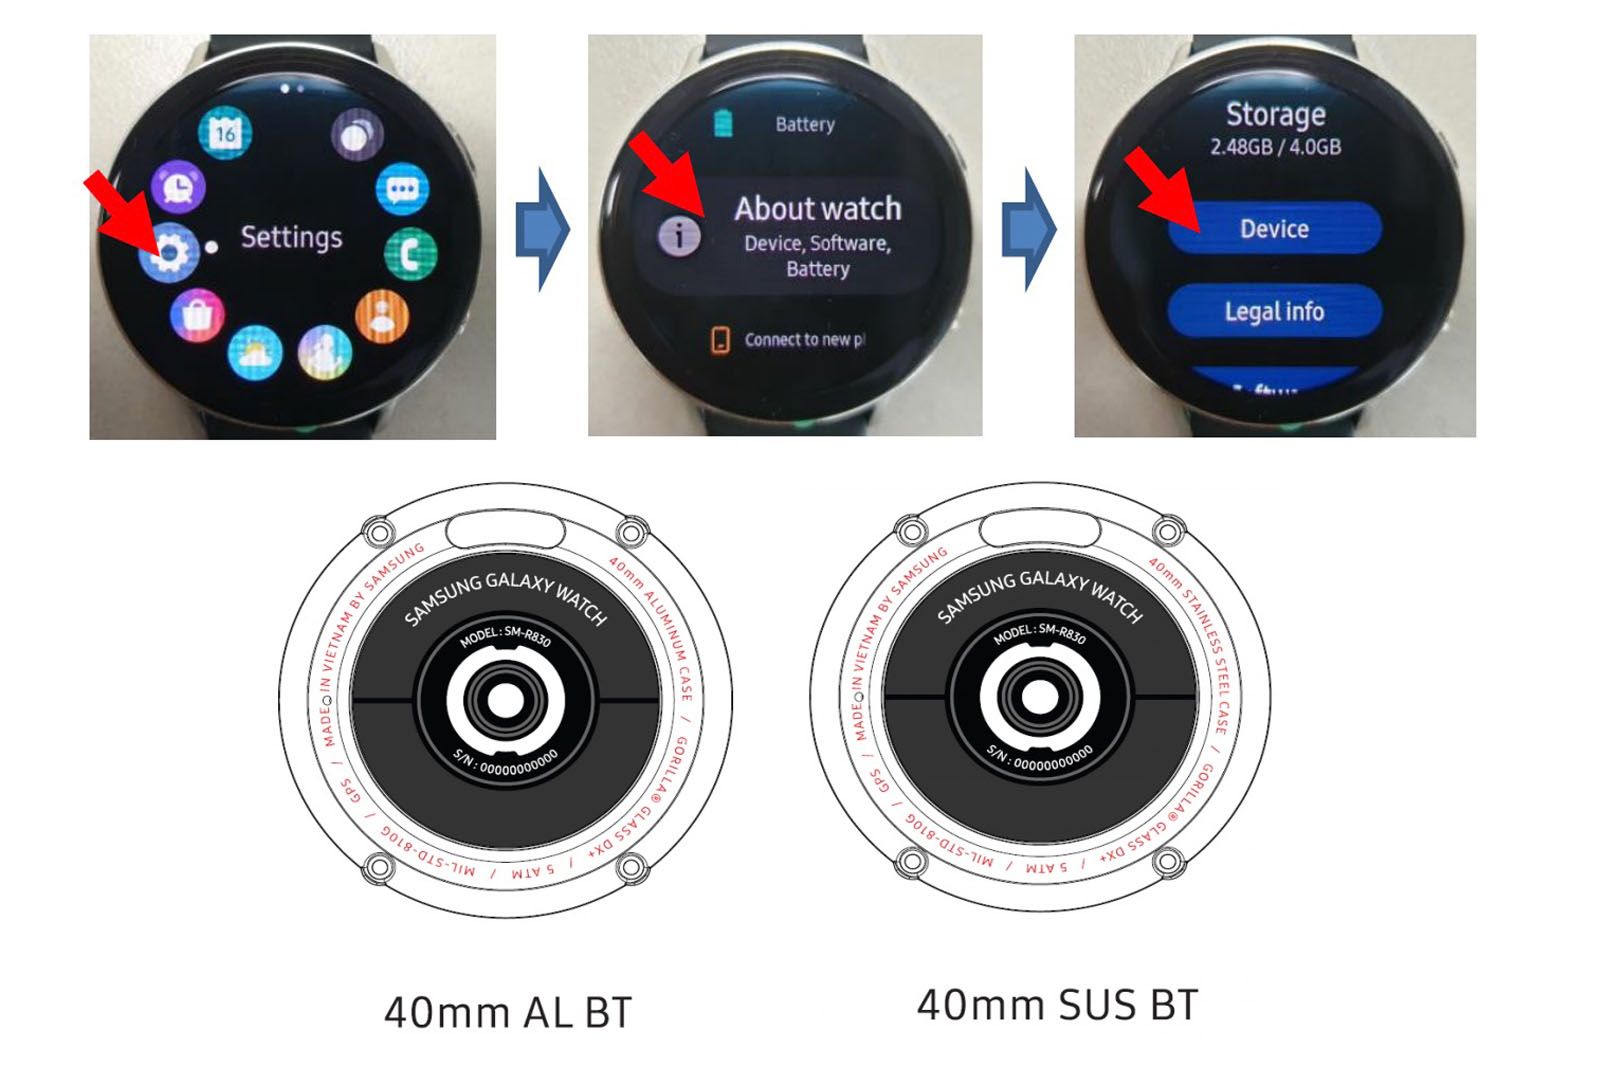 Samsung Galaxy Watch Active 2 design and specs revealed by FCC leak image 2